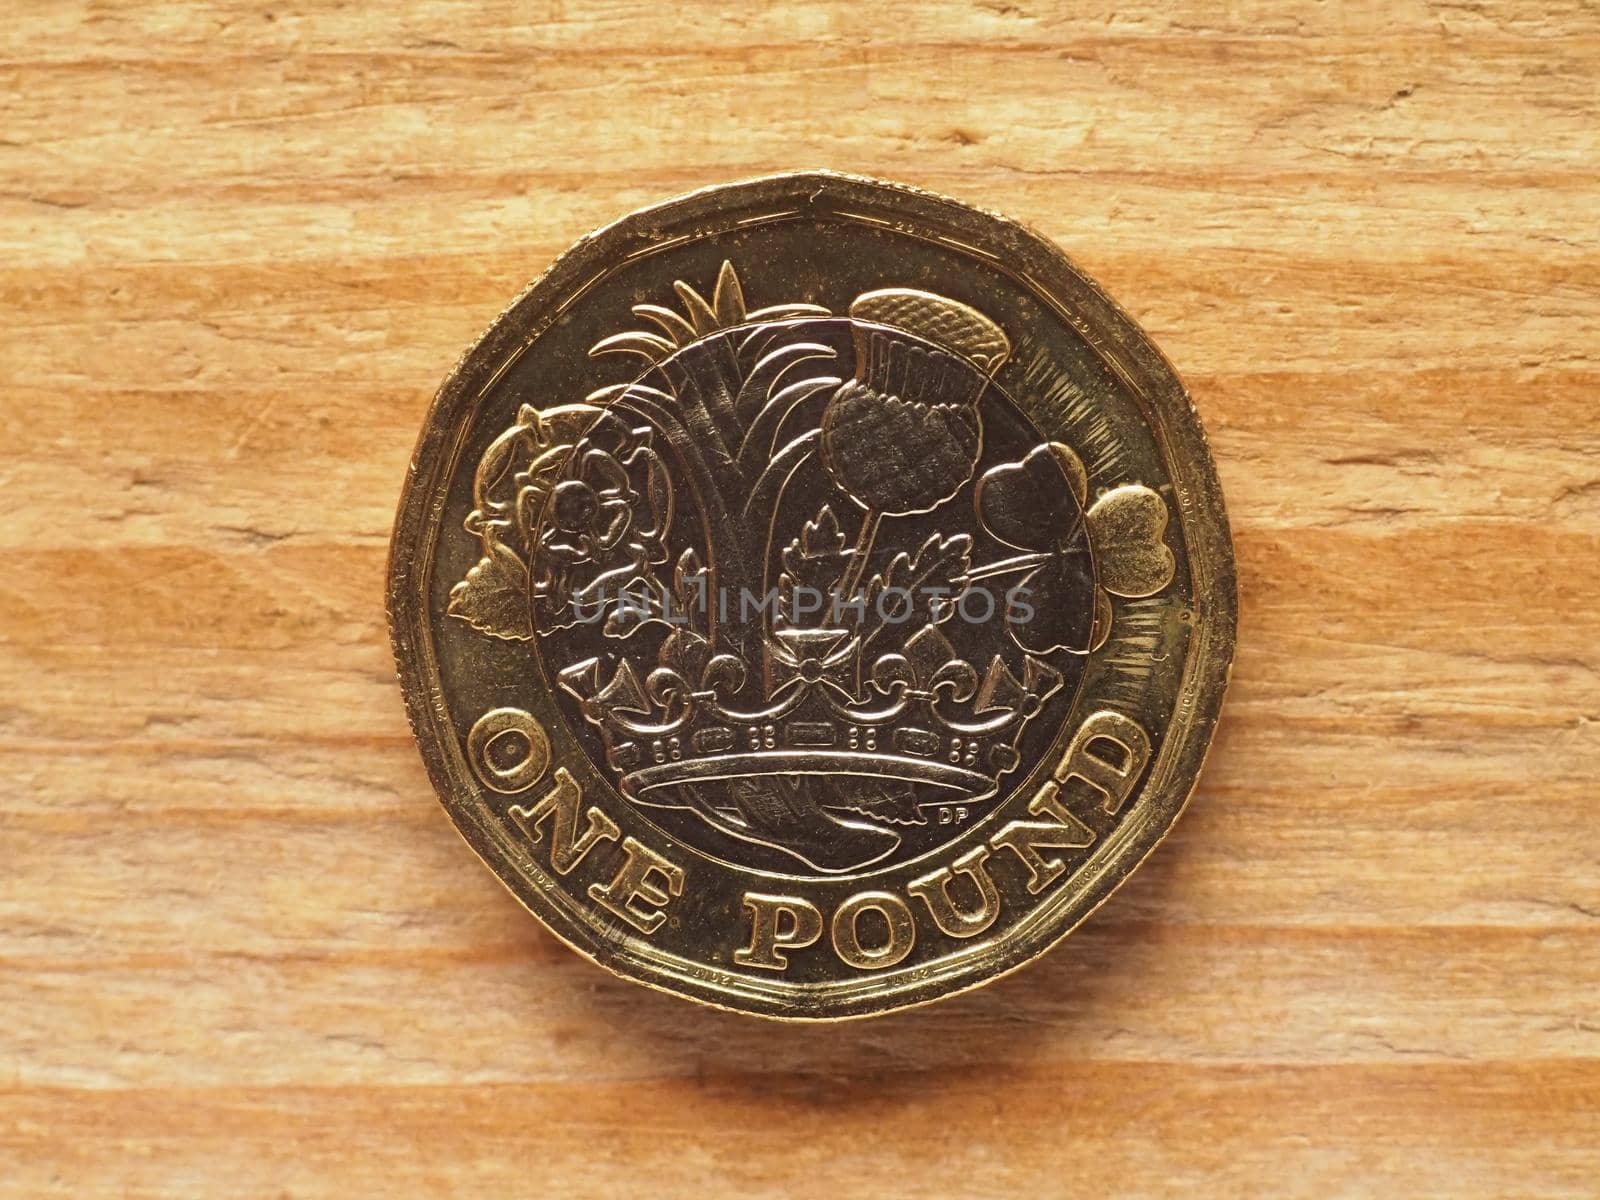 1 Pound coin, reverse side showing Nations of the Crown, currency of the UK by claudiodivizia